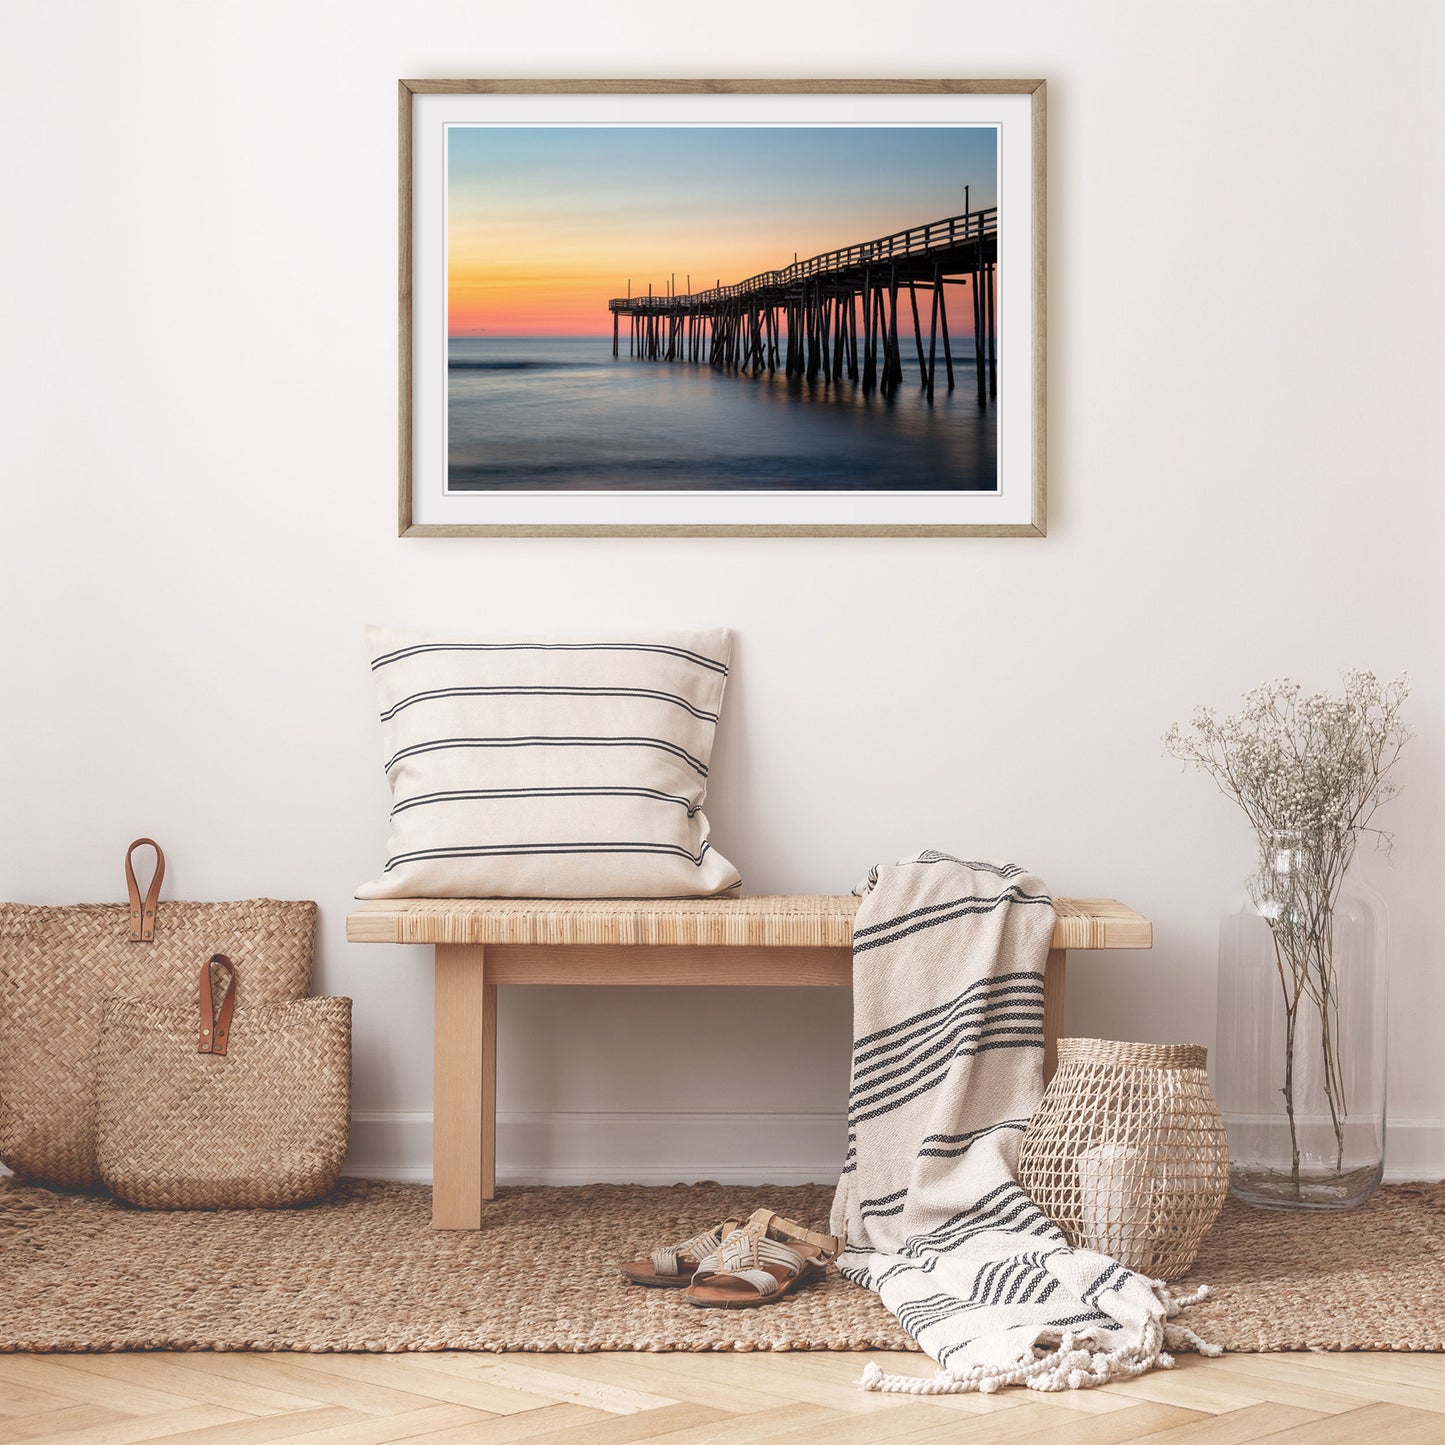 Seascape print capturing the brilliant colors of dawn at Avon Pier, showcasing the mesmerizing beauty of Outer Banks, North Carolina.